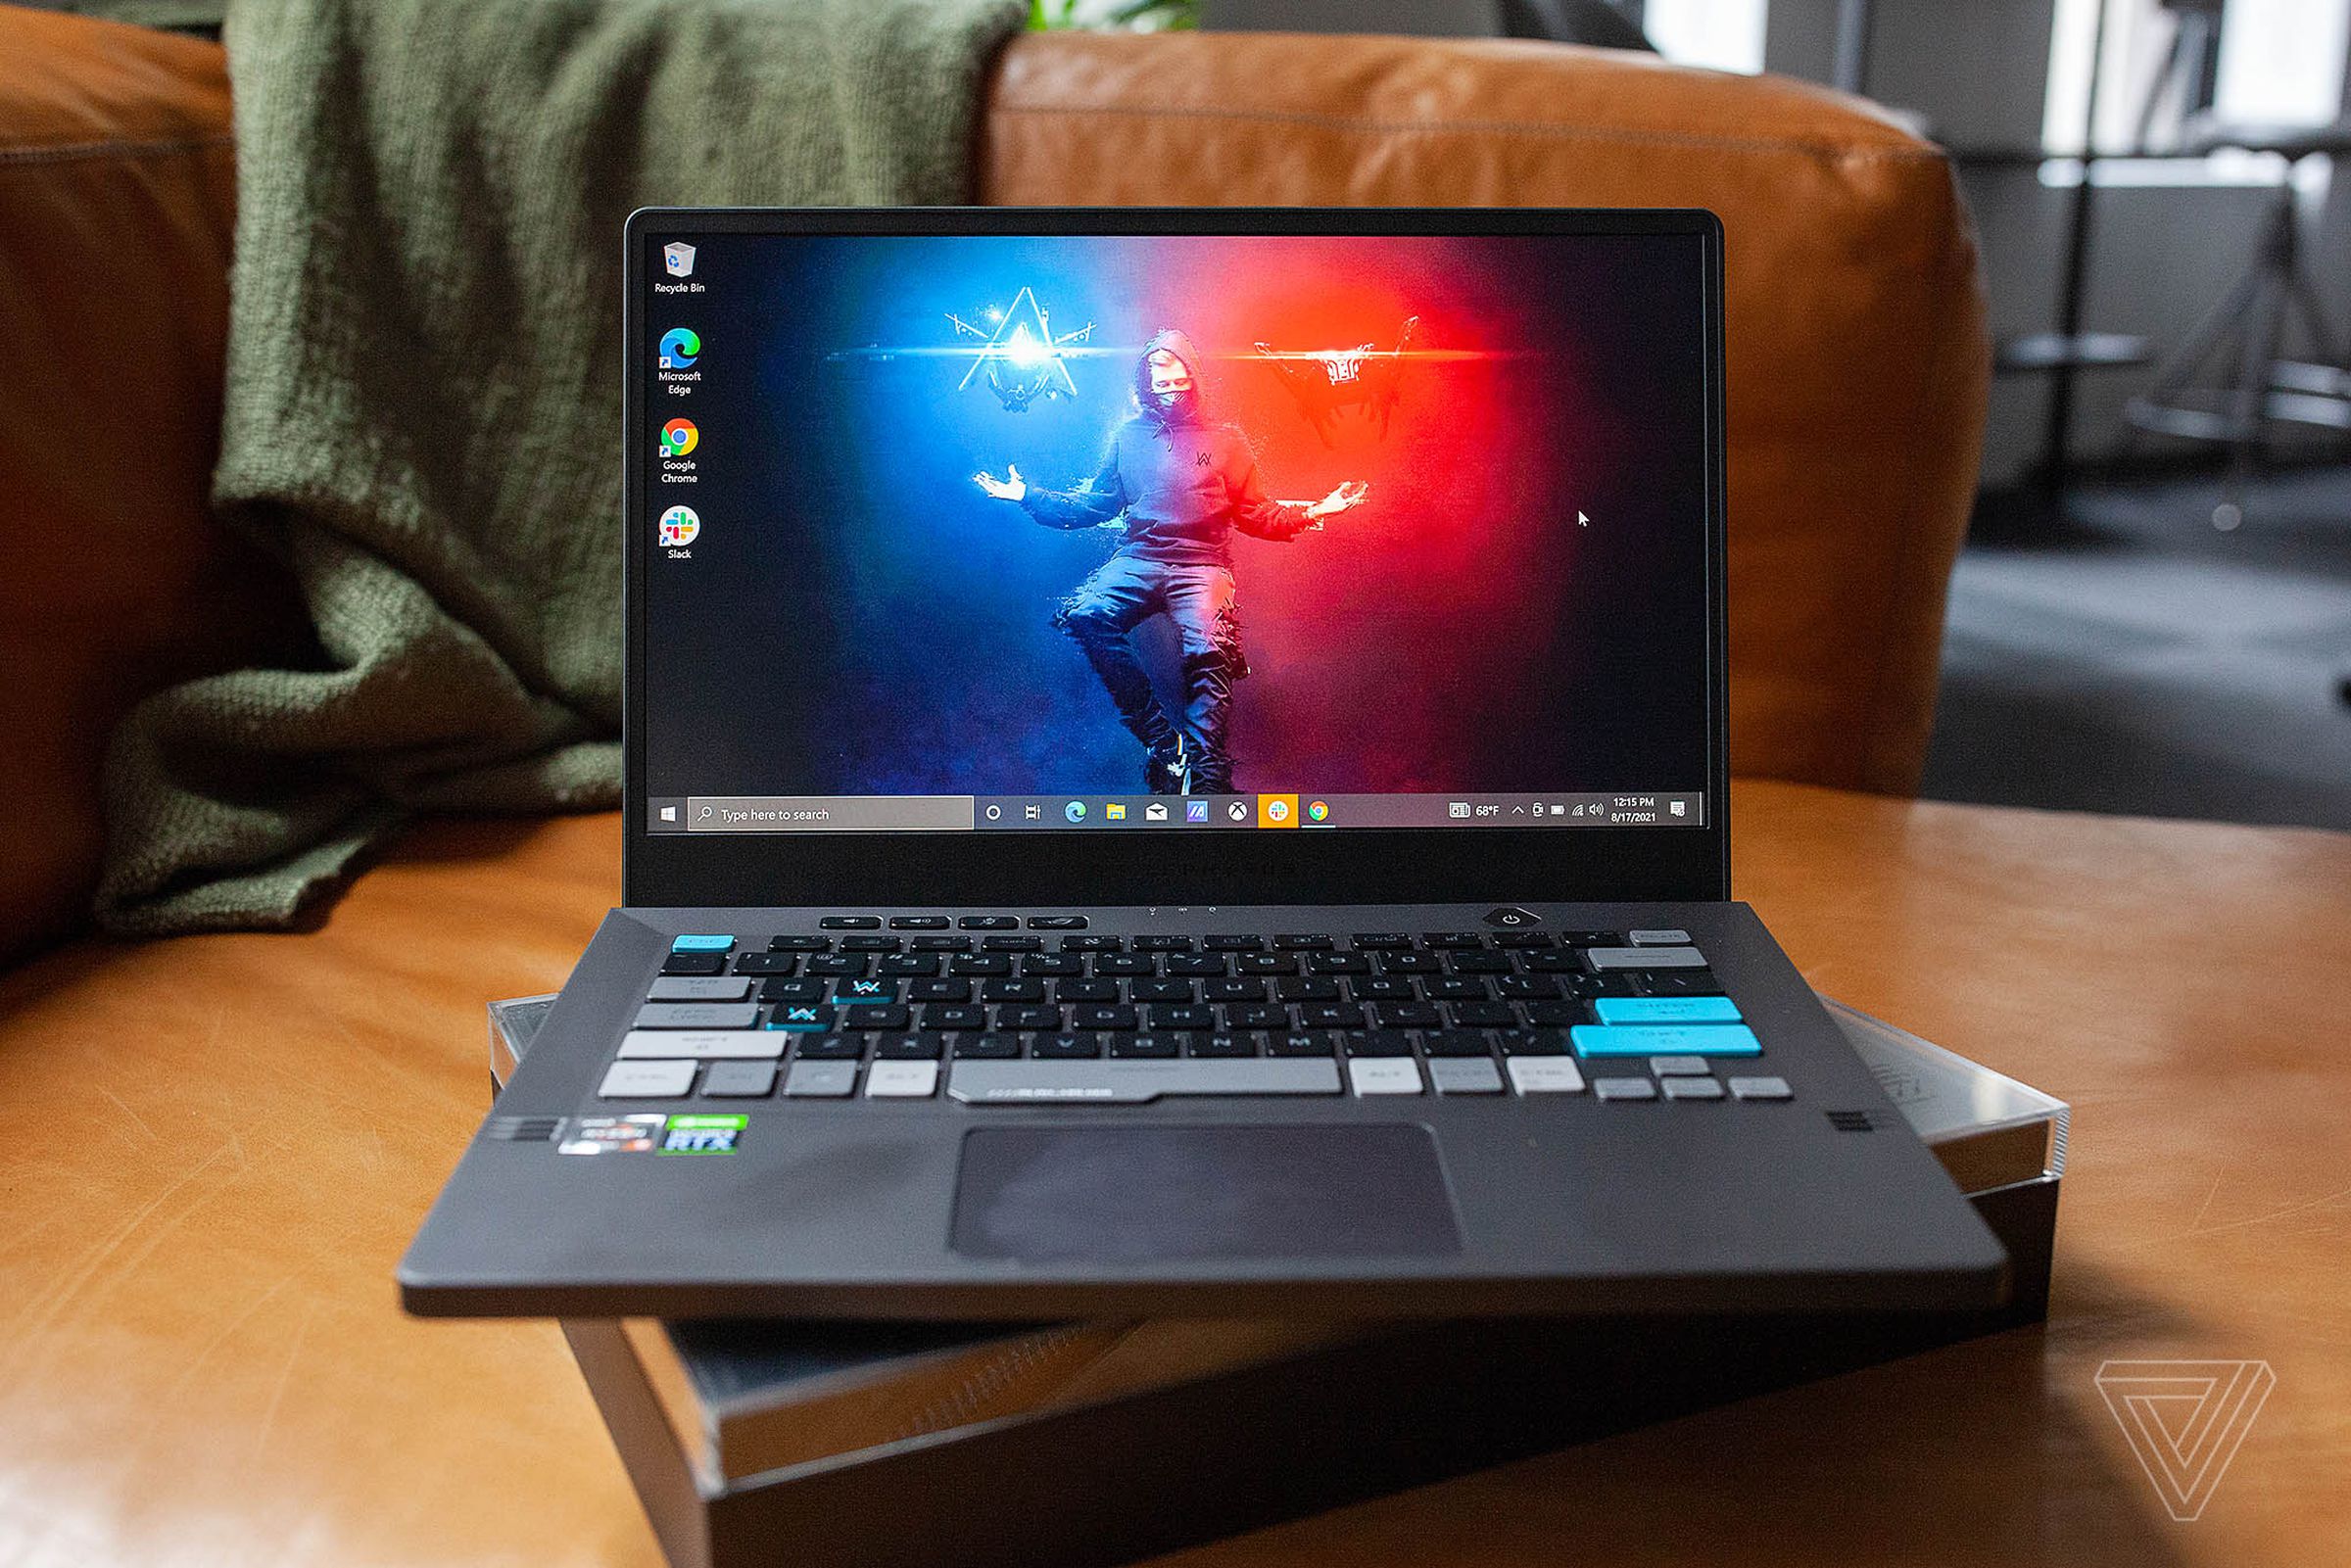 The Asus ROG Zephyrus G14 Alan Walker Edition on a couch seen from the front, open. The screen displays Alan Walker hovering on a red and blue background, conjuring lights of each color with his hands.